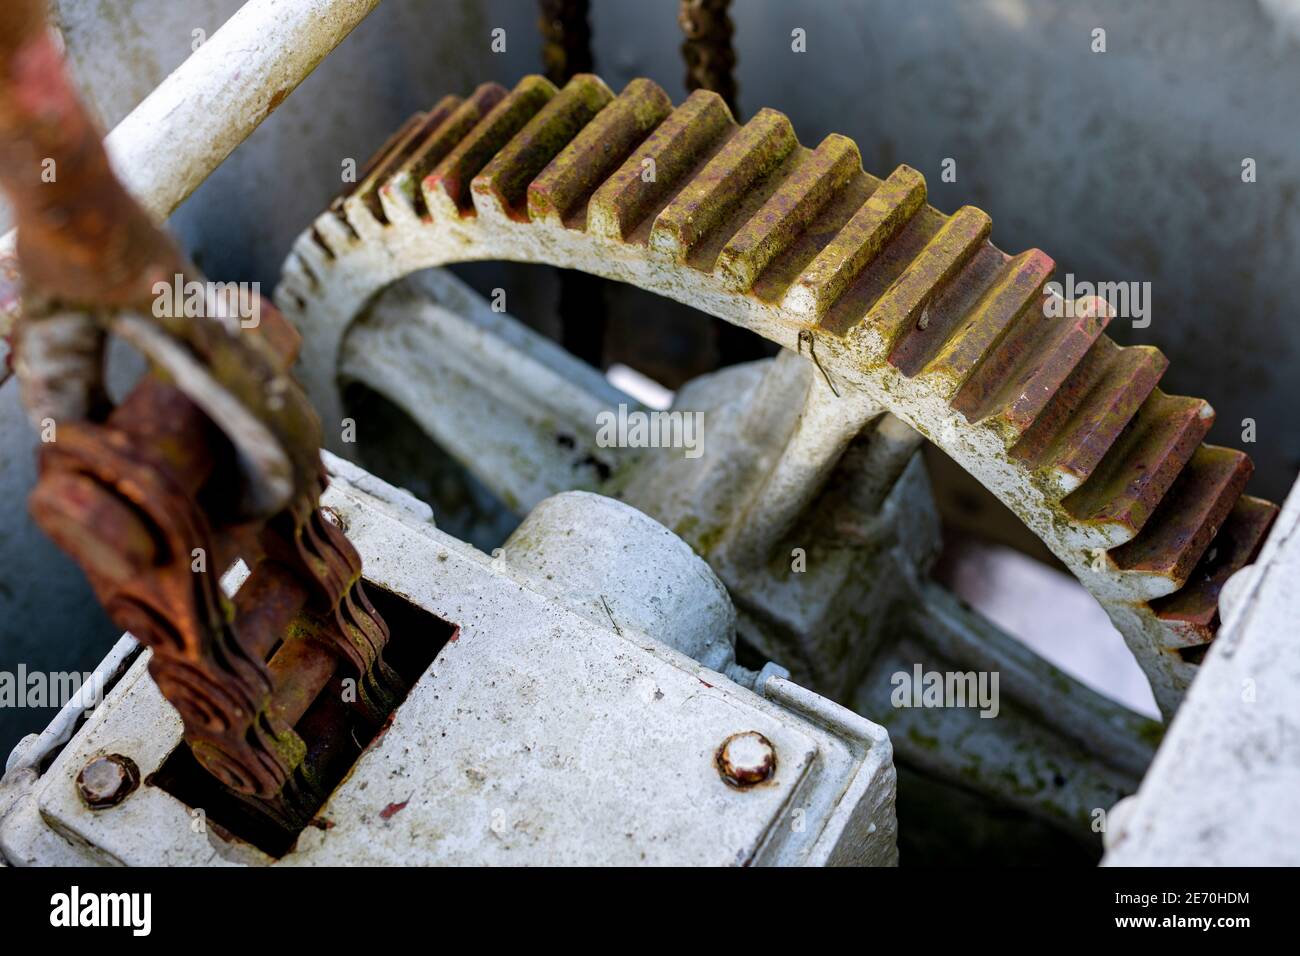 Large gears in an old gearbox. Steel structure to transfer rotational energy. Light background. Stock Photo